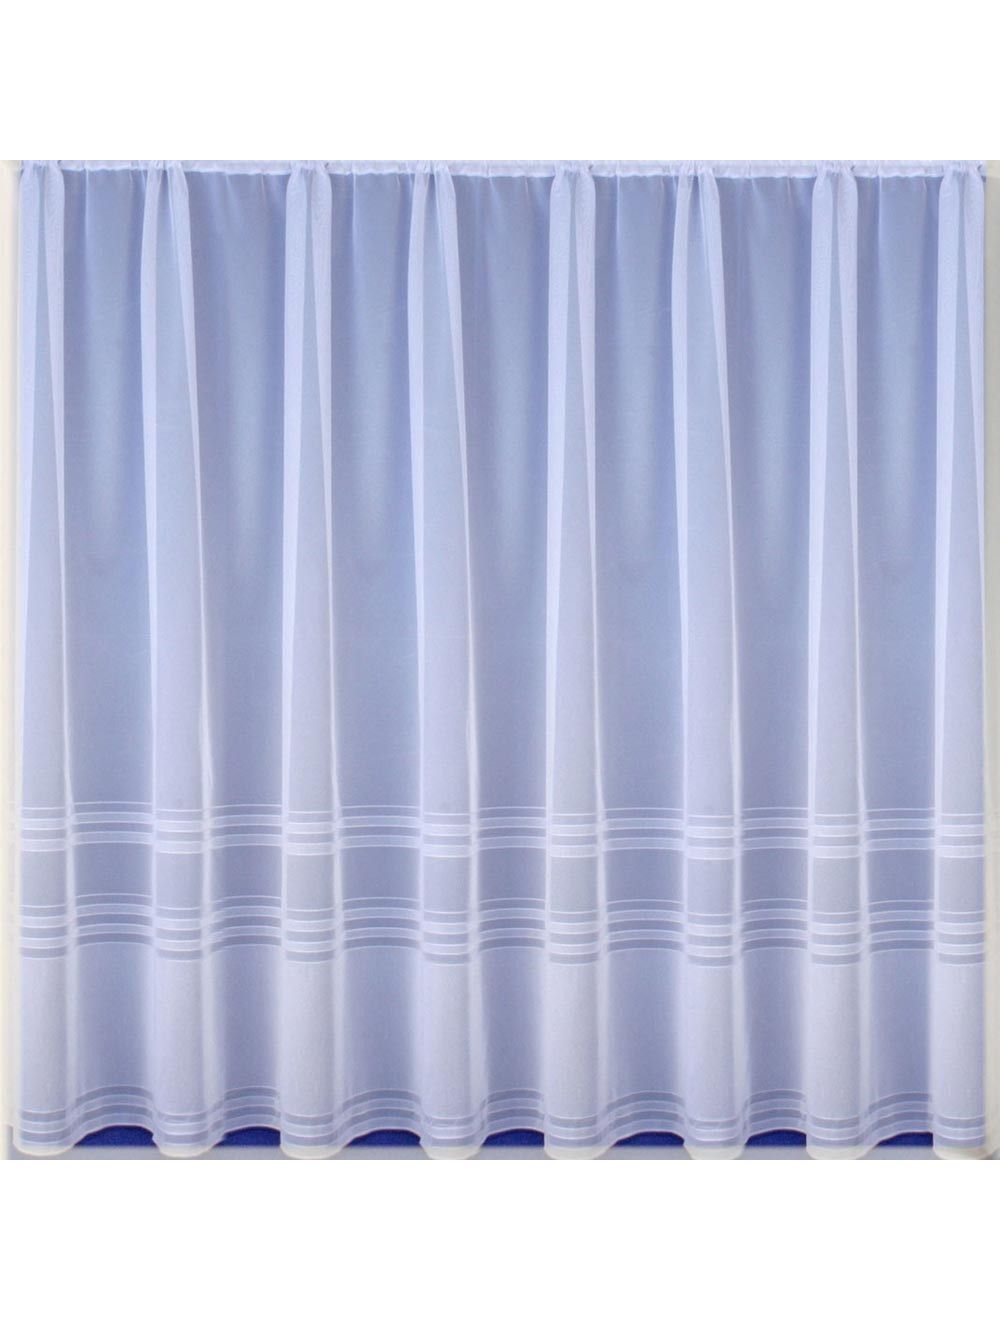 Brooklyn Net Curtains Complete Roll | Bulk Nets | Calico Laine